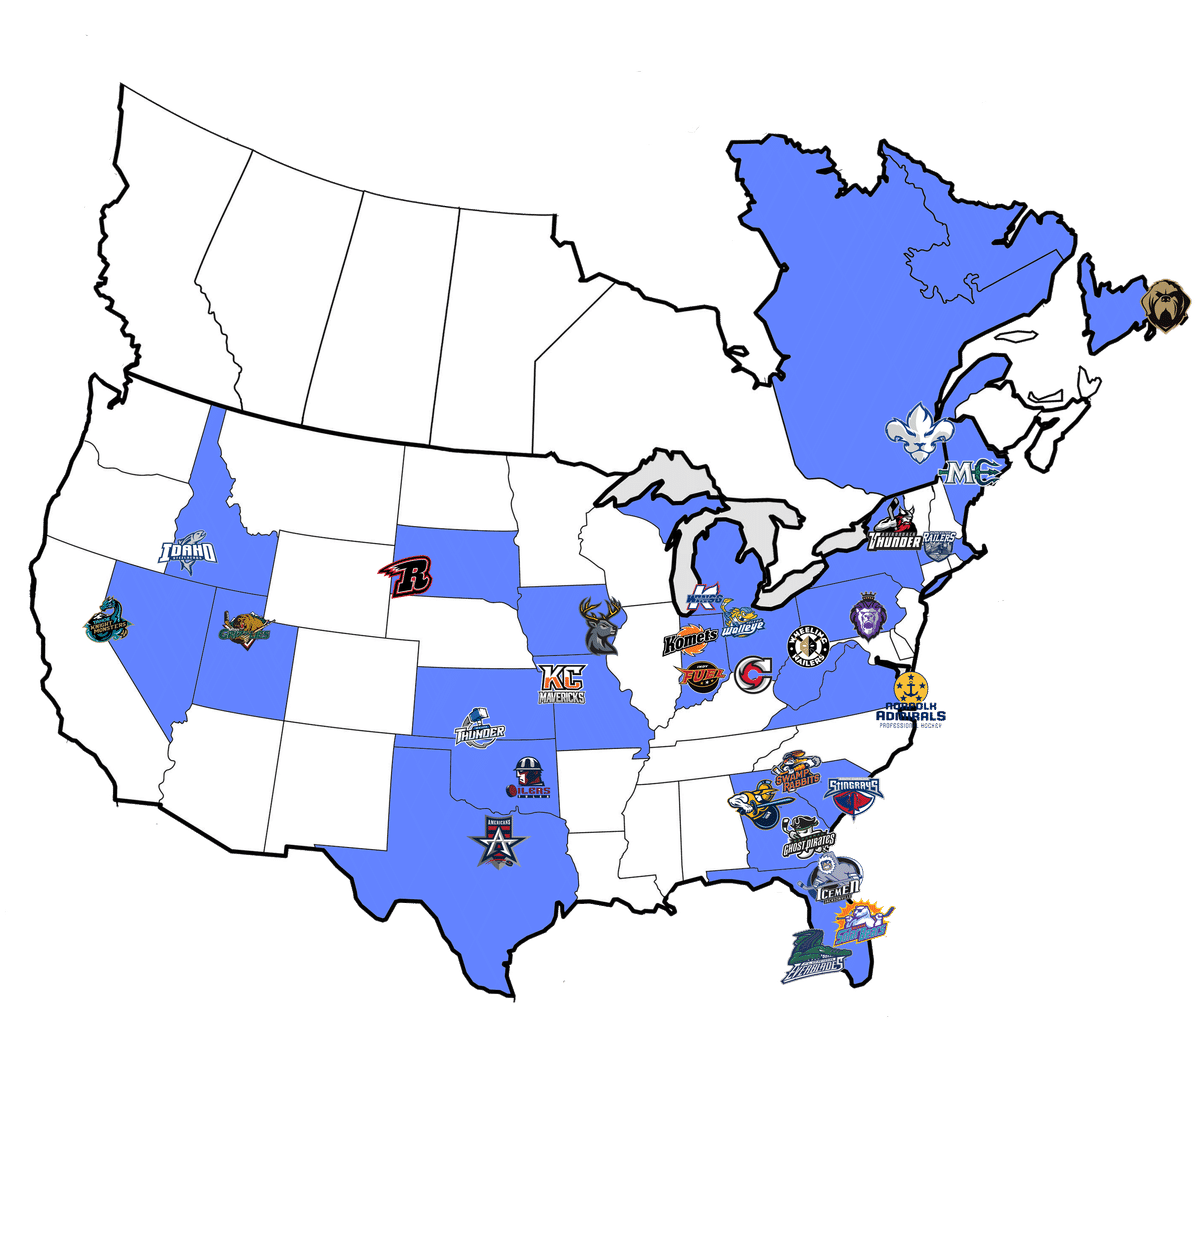 e-c-h-l--updated--map-with--tahoe-65694a7a31df2.png